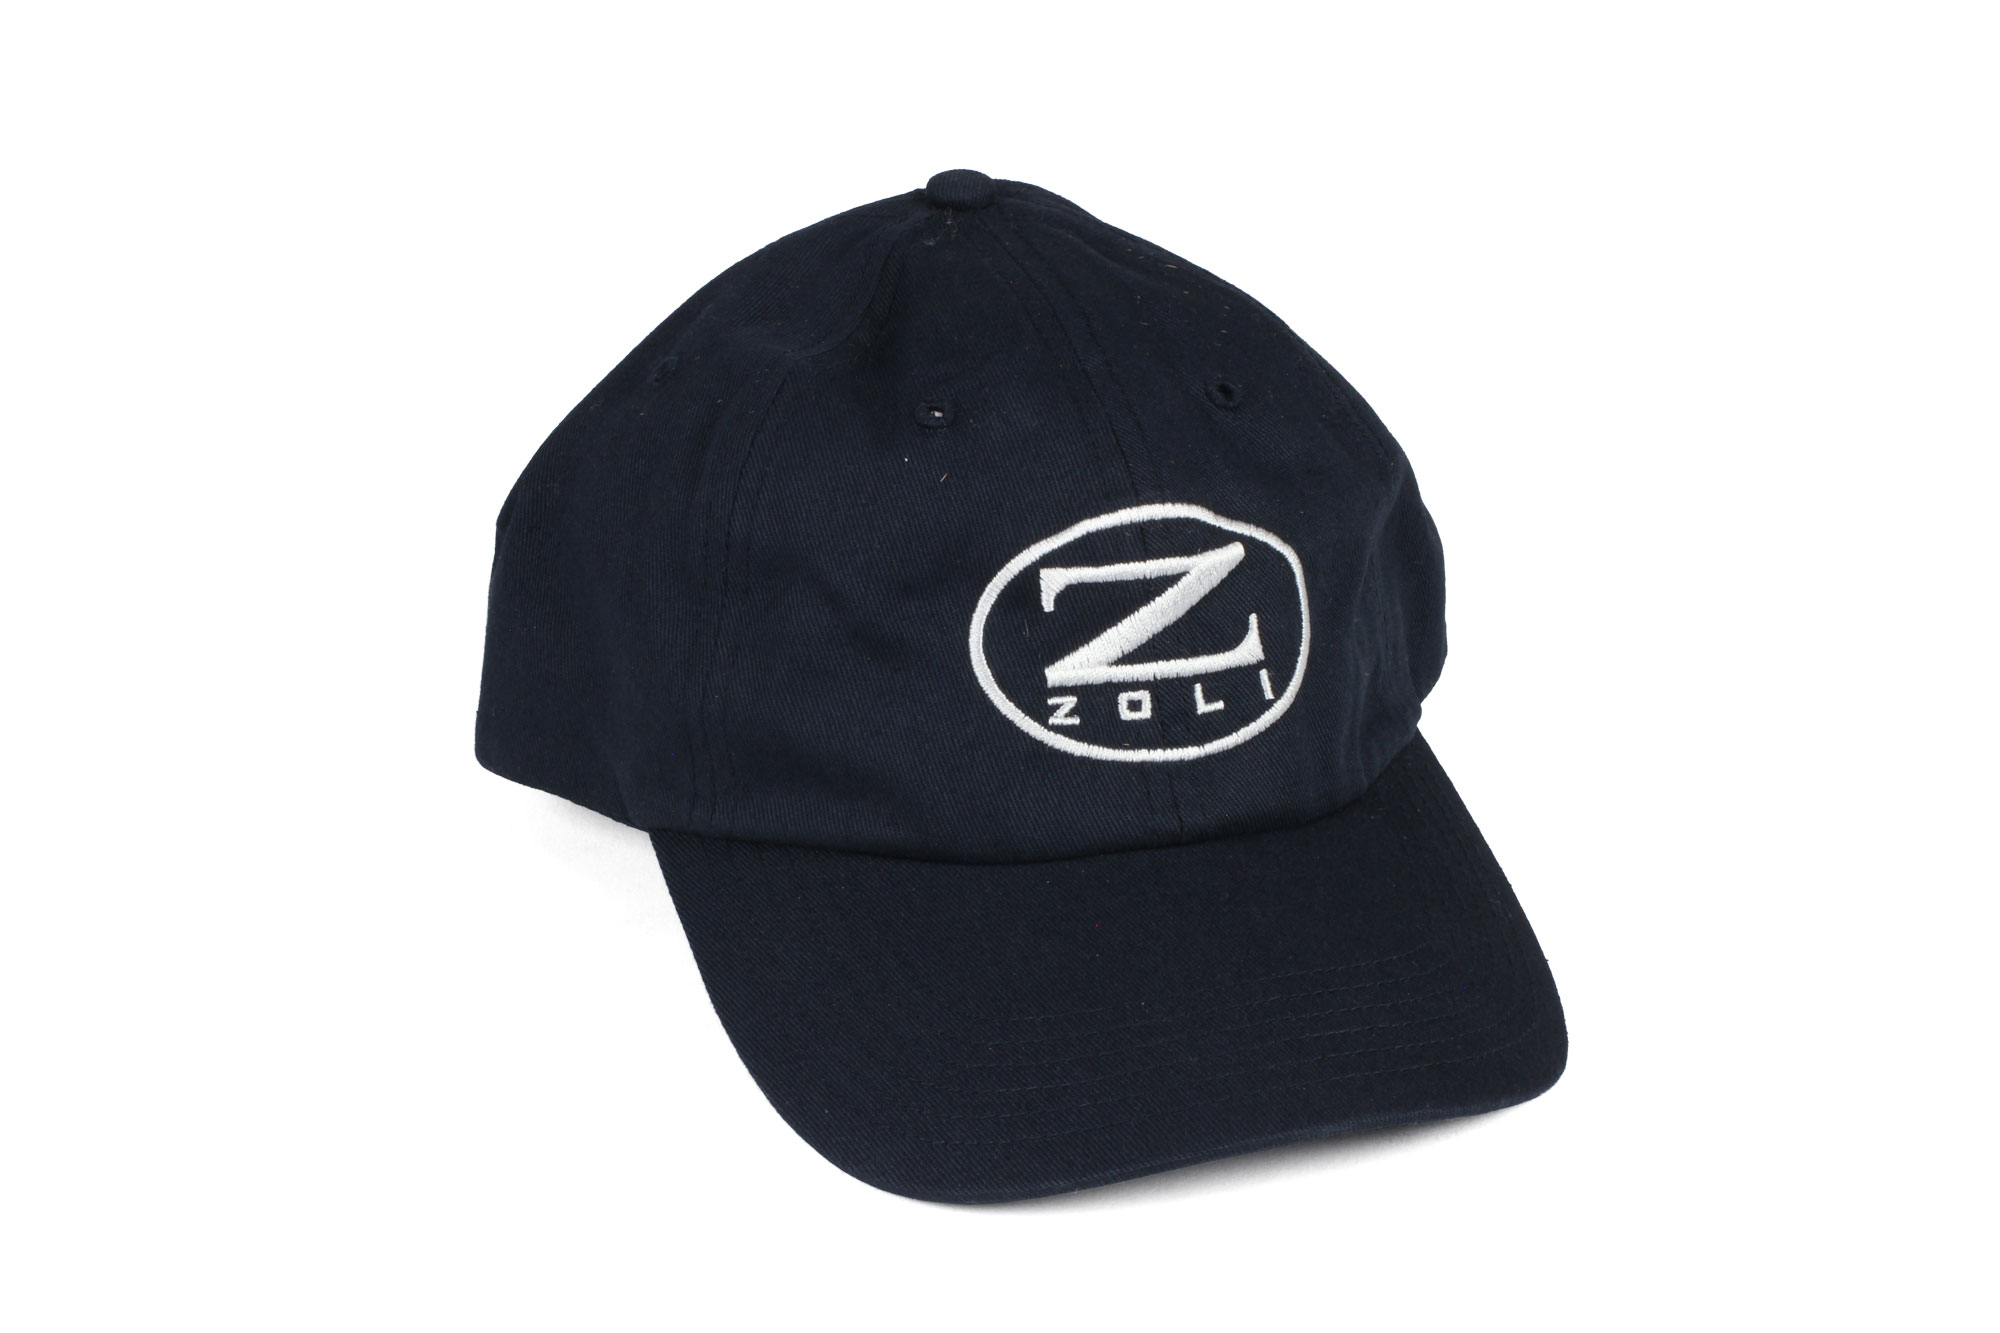 Zoli Embroidered Unstructured Hat (Navy)